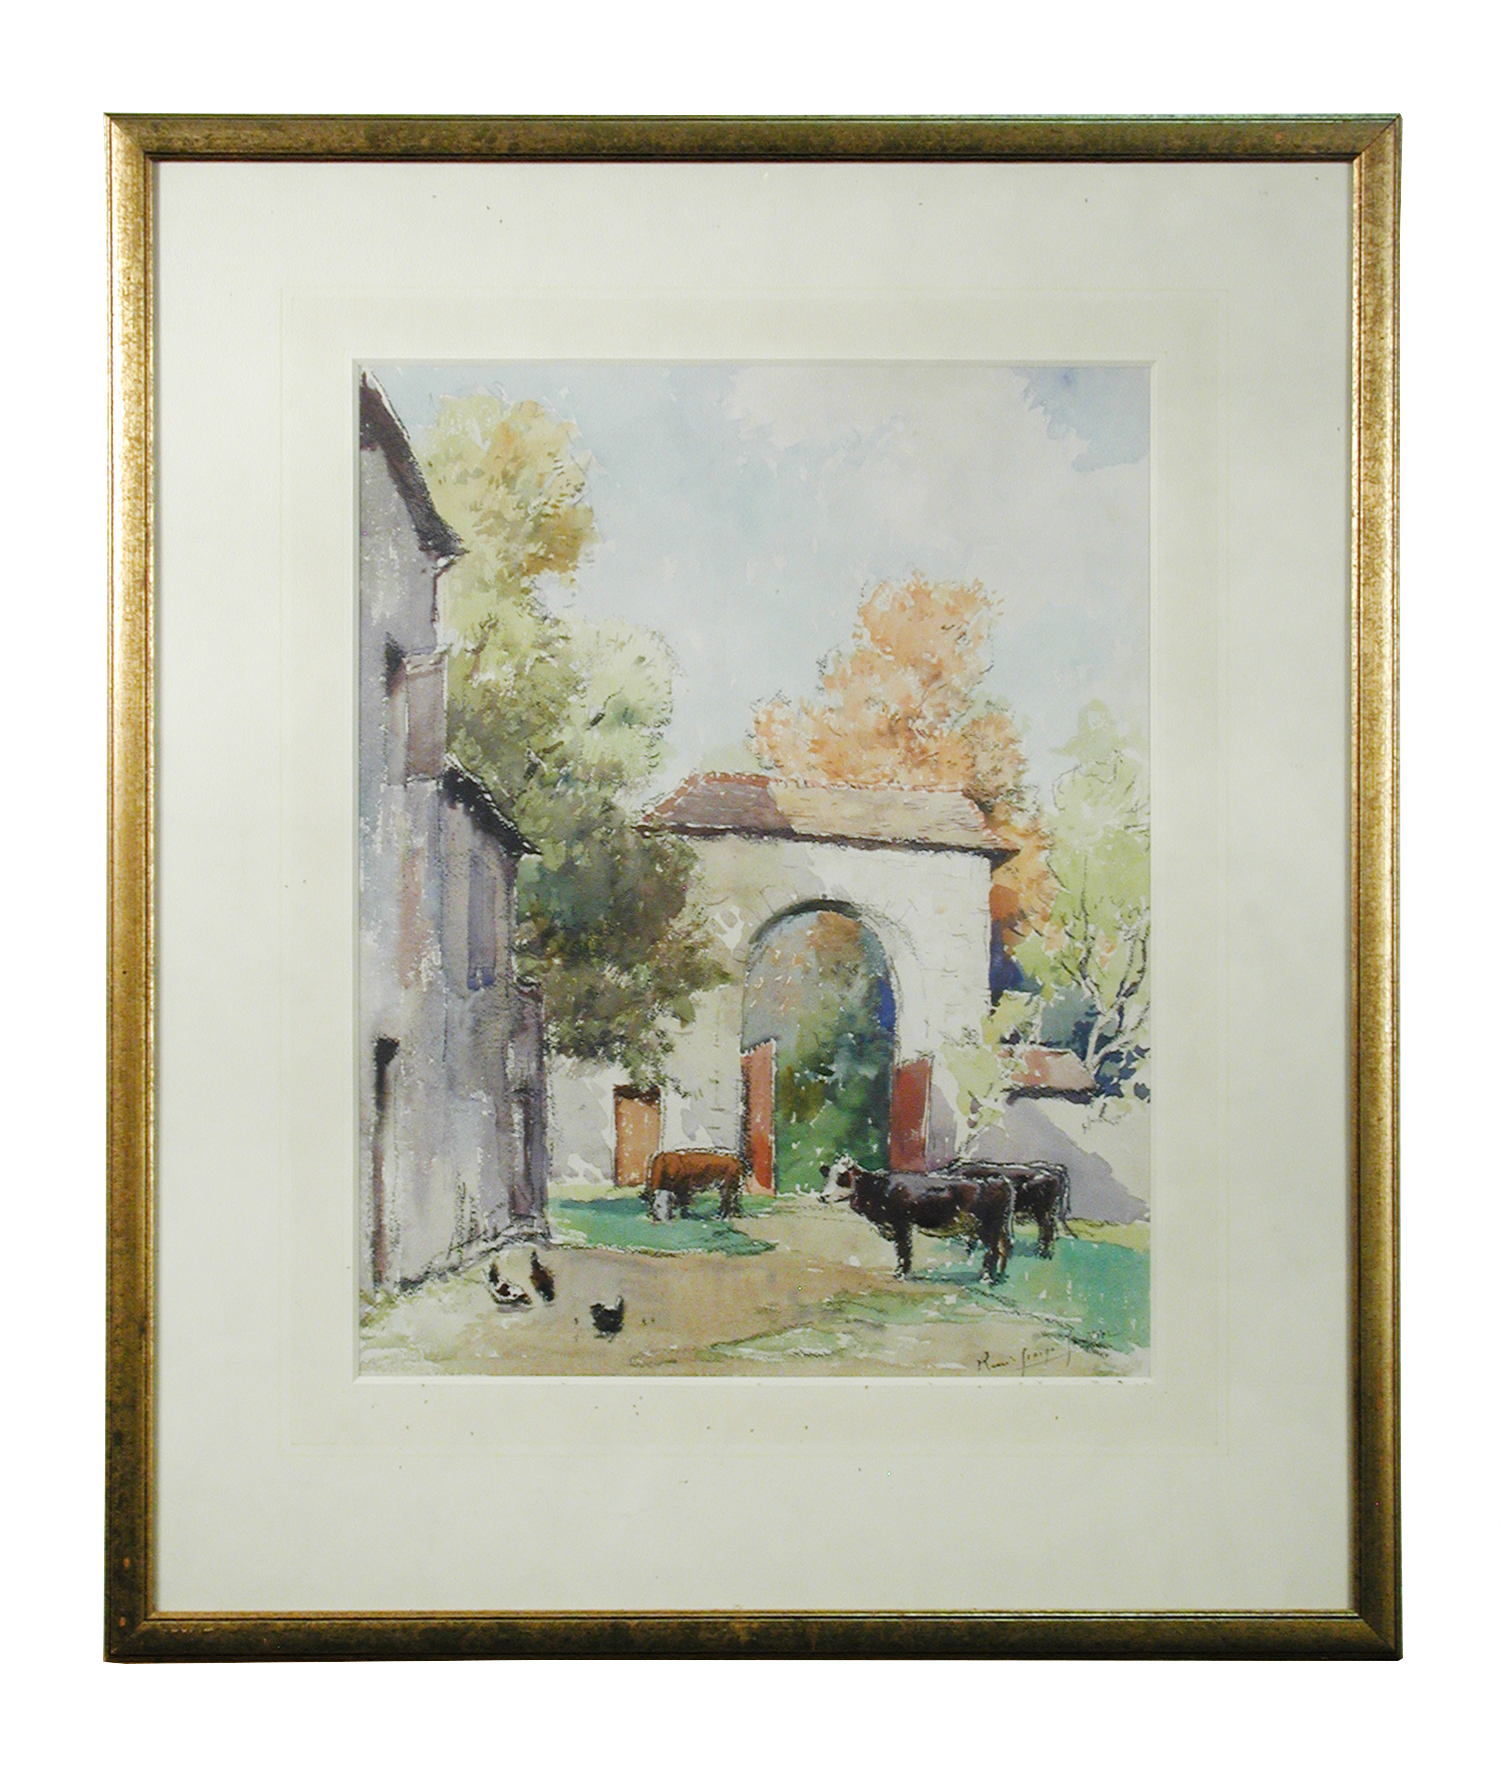 Rene George Gautier (French, 19th Century), Farmyard scene with cattle, signed lower right "Rene